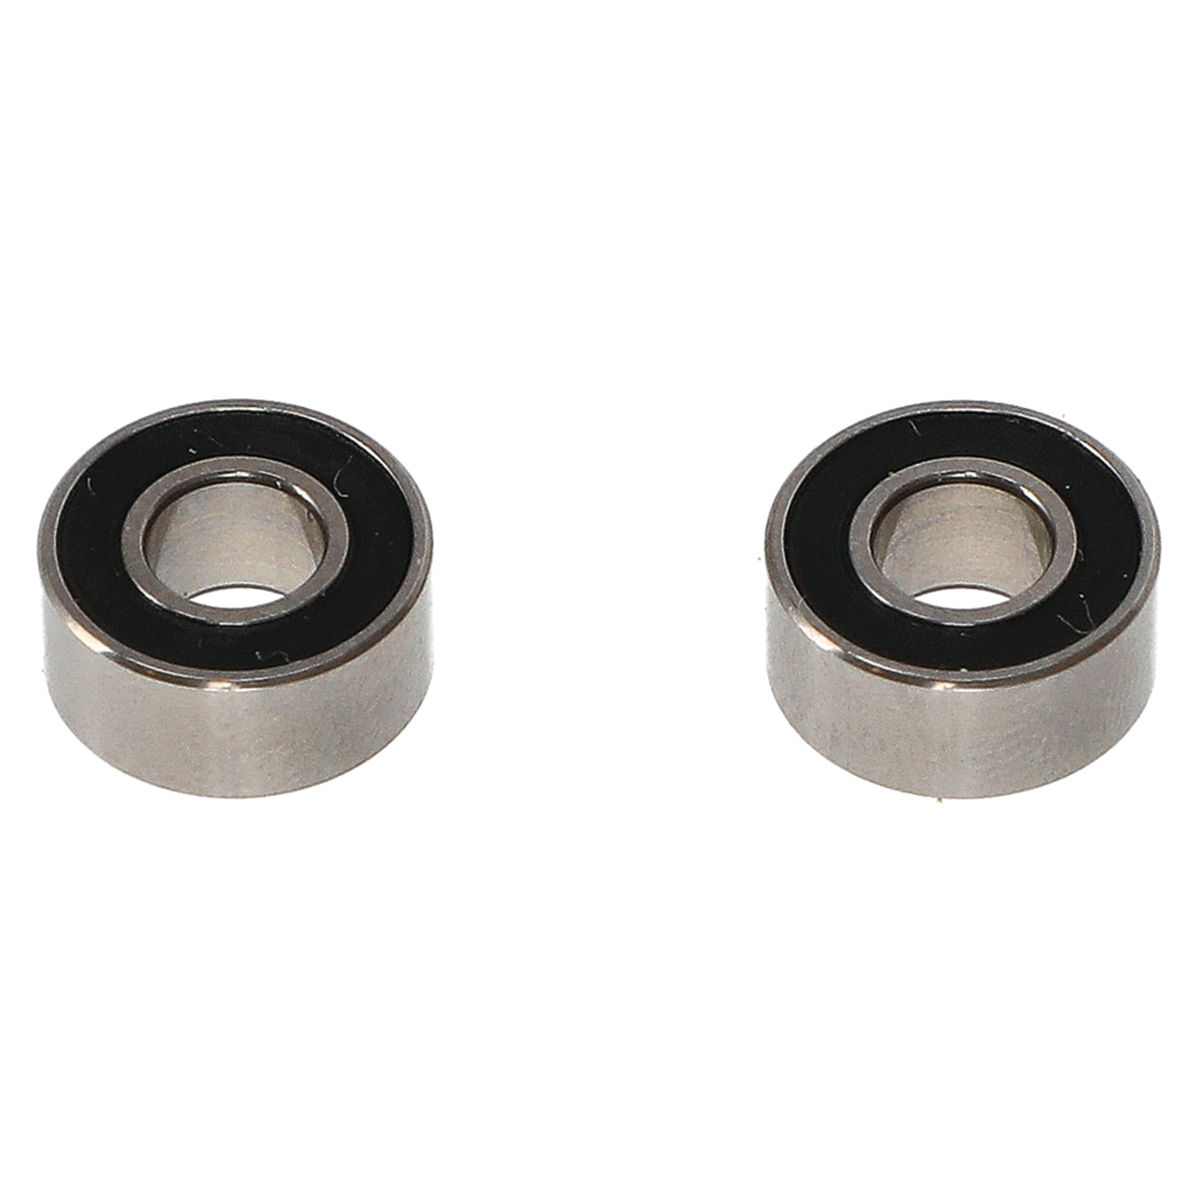 Bearing to Idle Pulley for PBS 10 & 13 2 pcs/pack